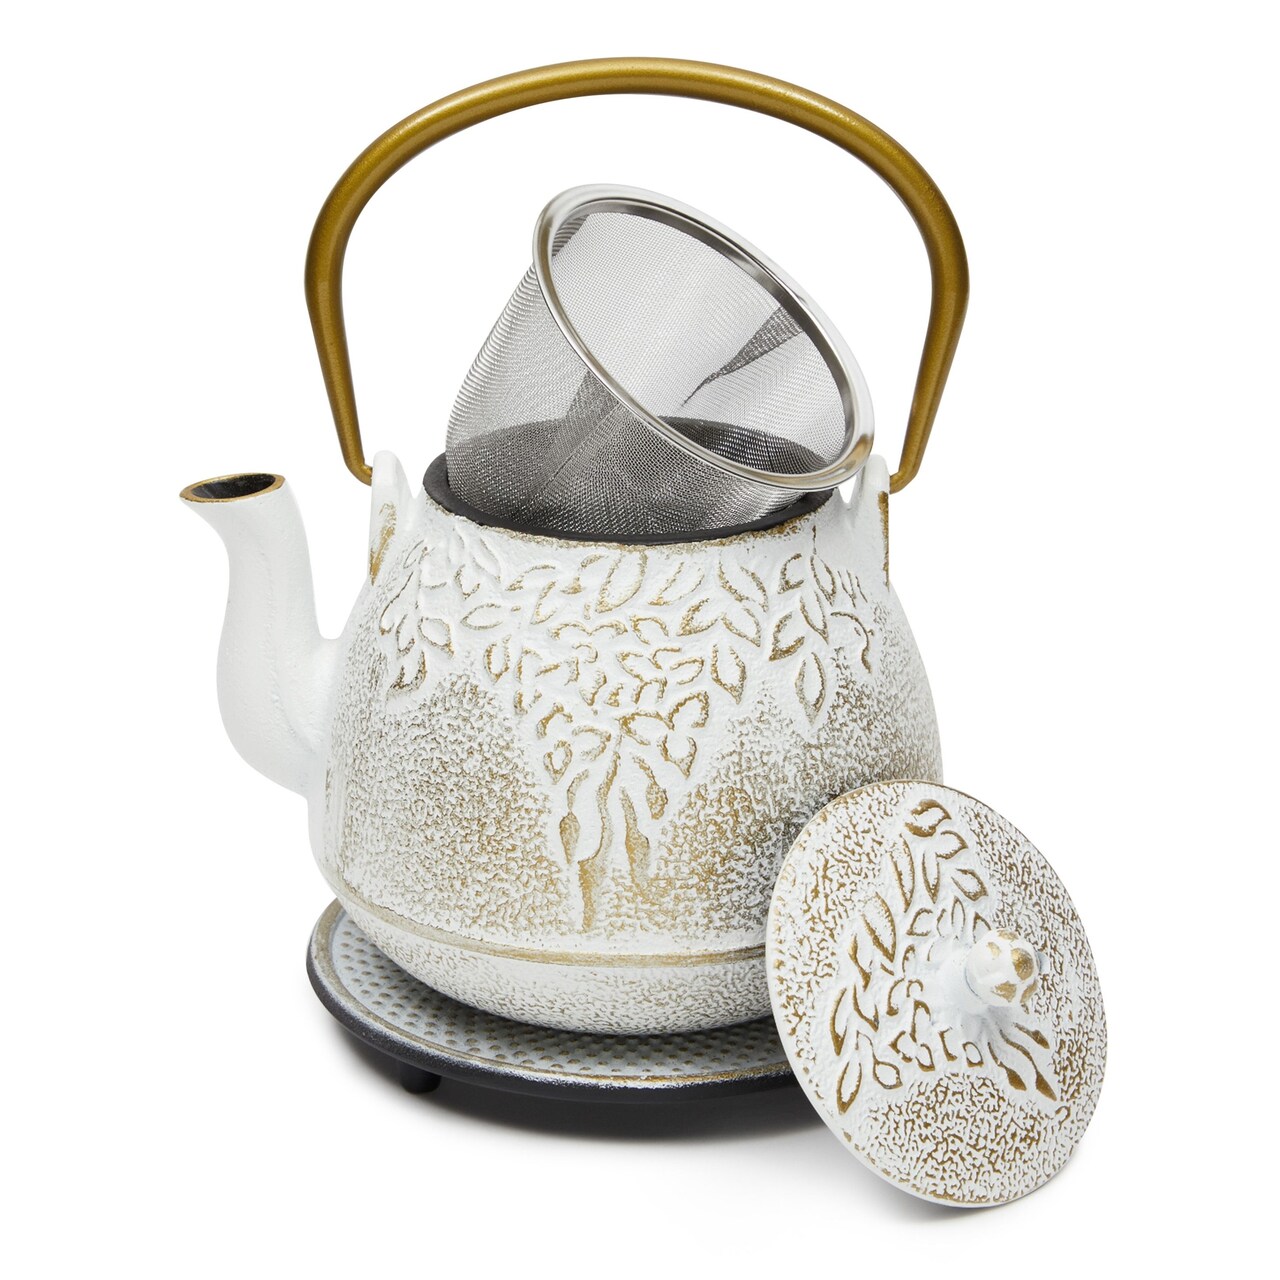 32 oz White and Gold Japanese Cast Iron Teapot Set, Decorative Loose Leaf Tetsubin with Handle, Infuser, Trivet (900 ml)